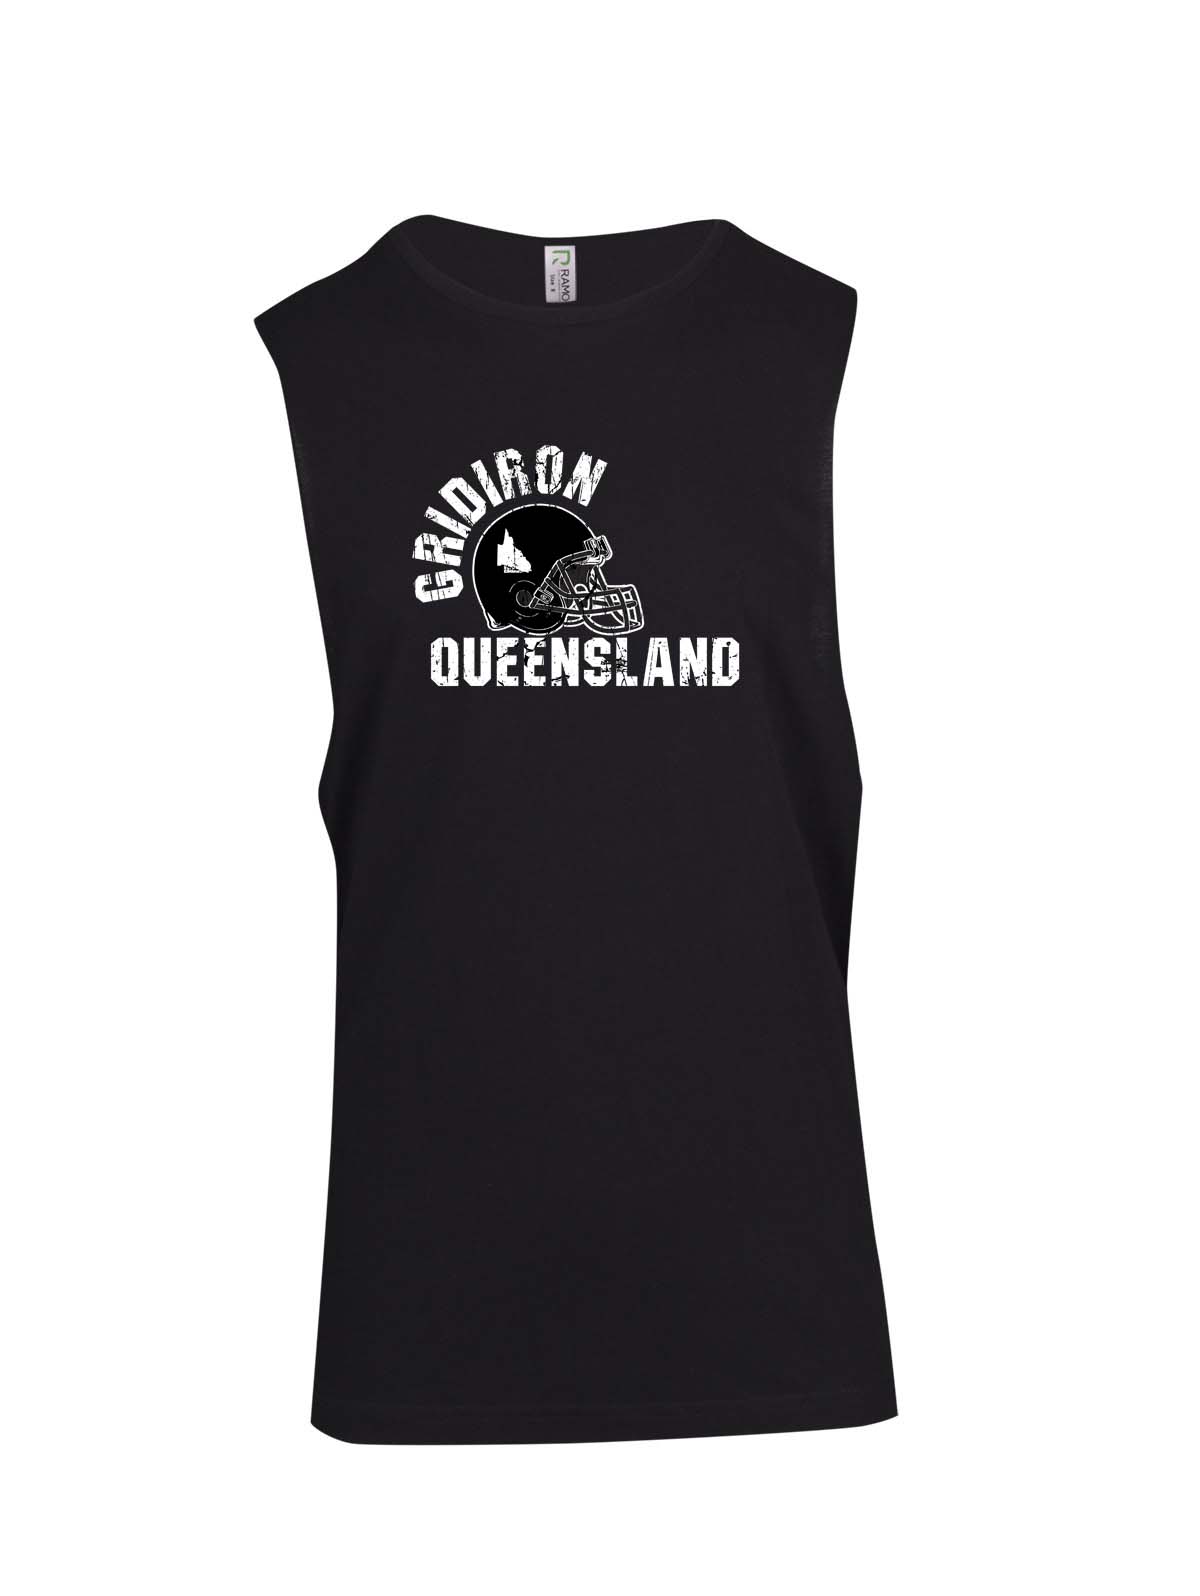 Gridiron Queensland Black and White Muscle Shirt